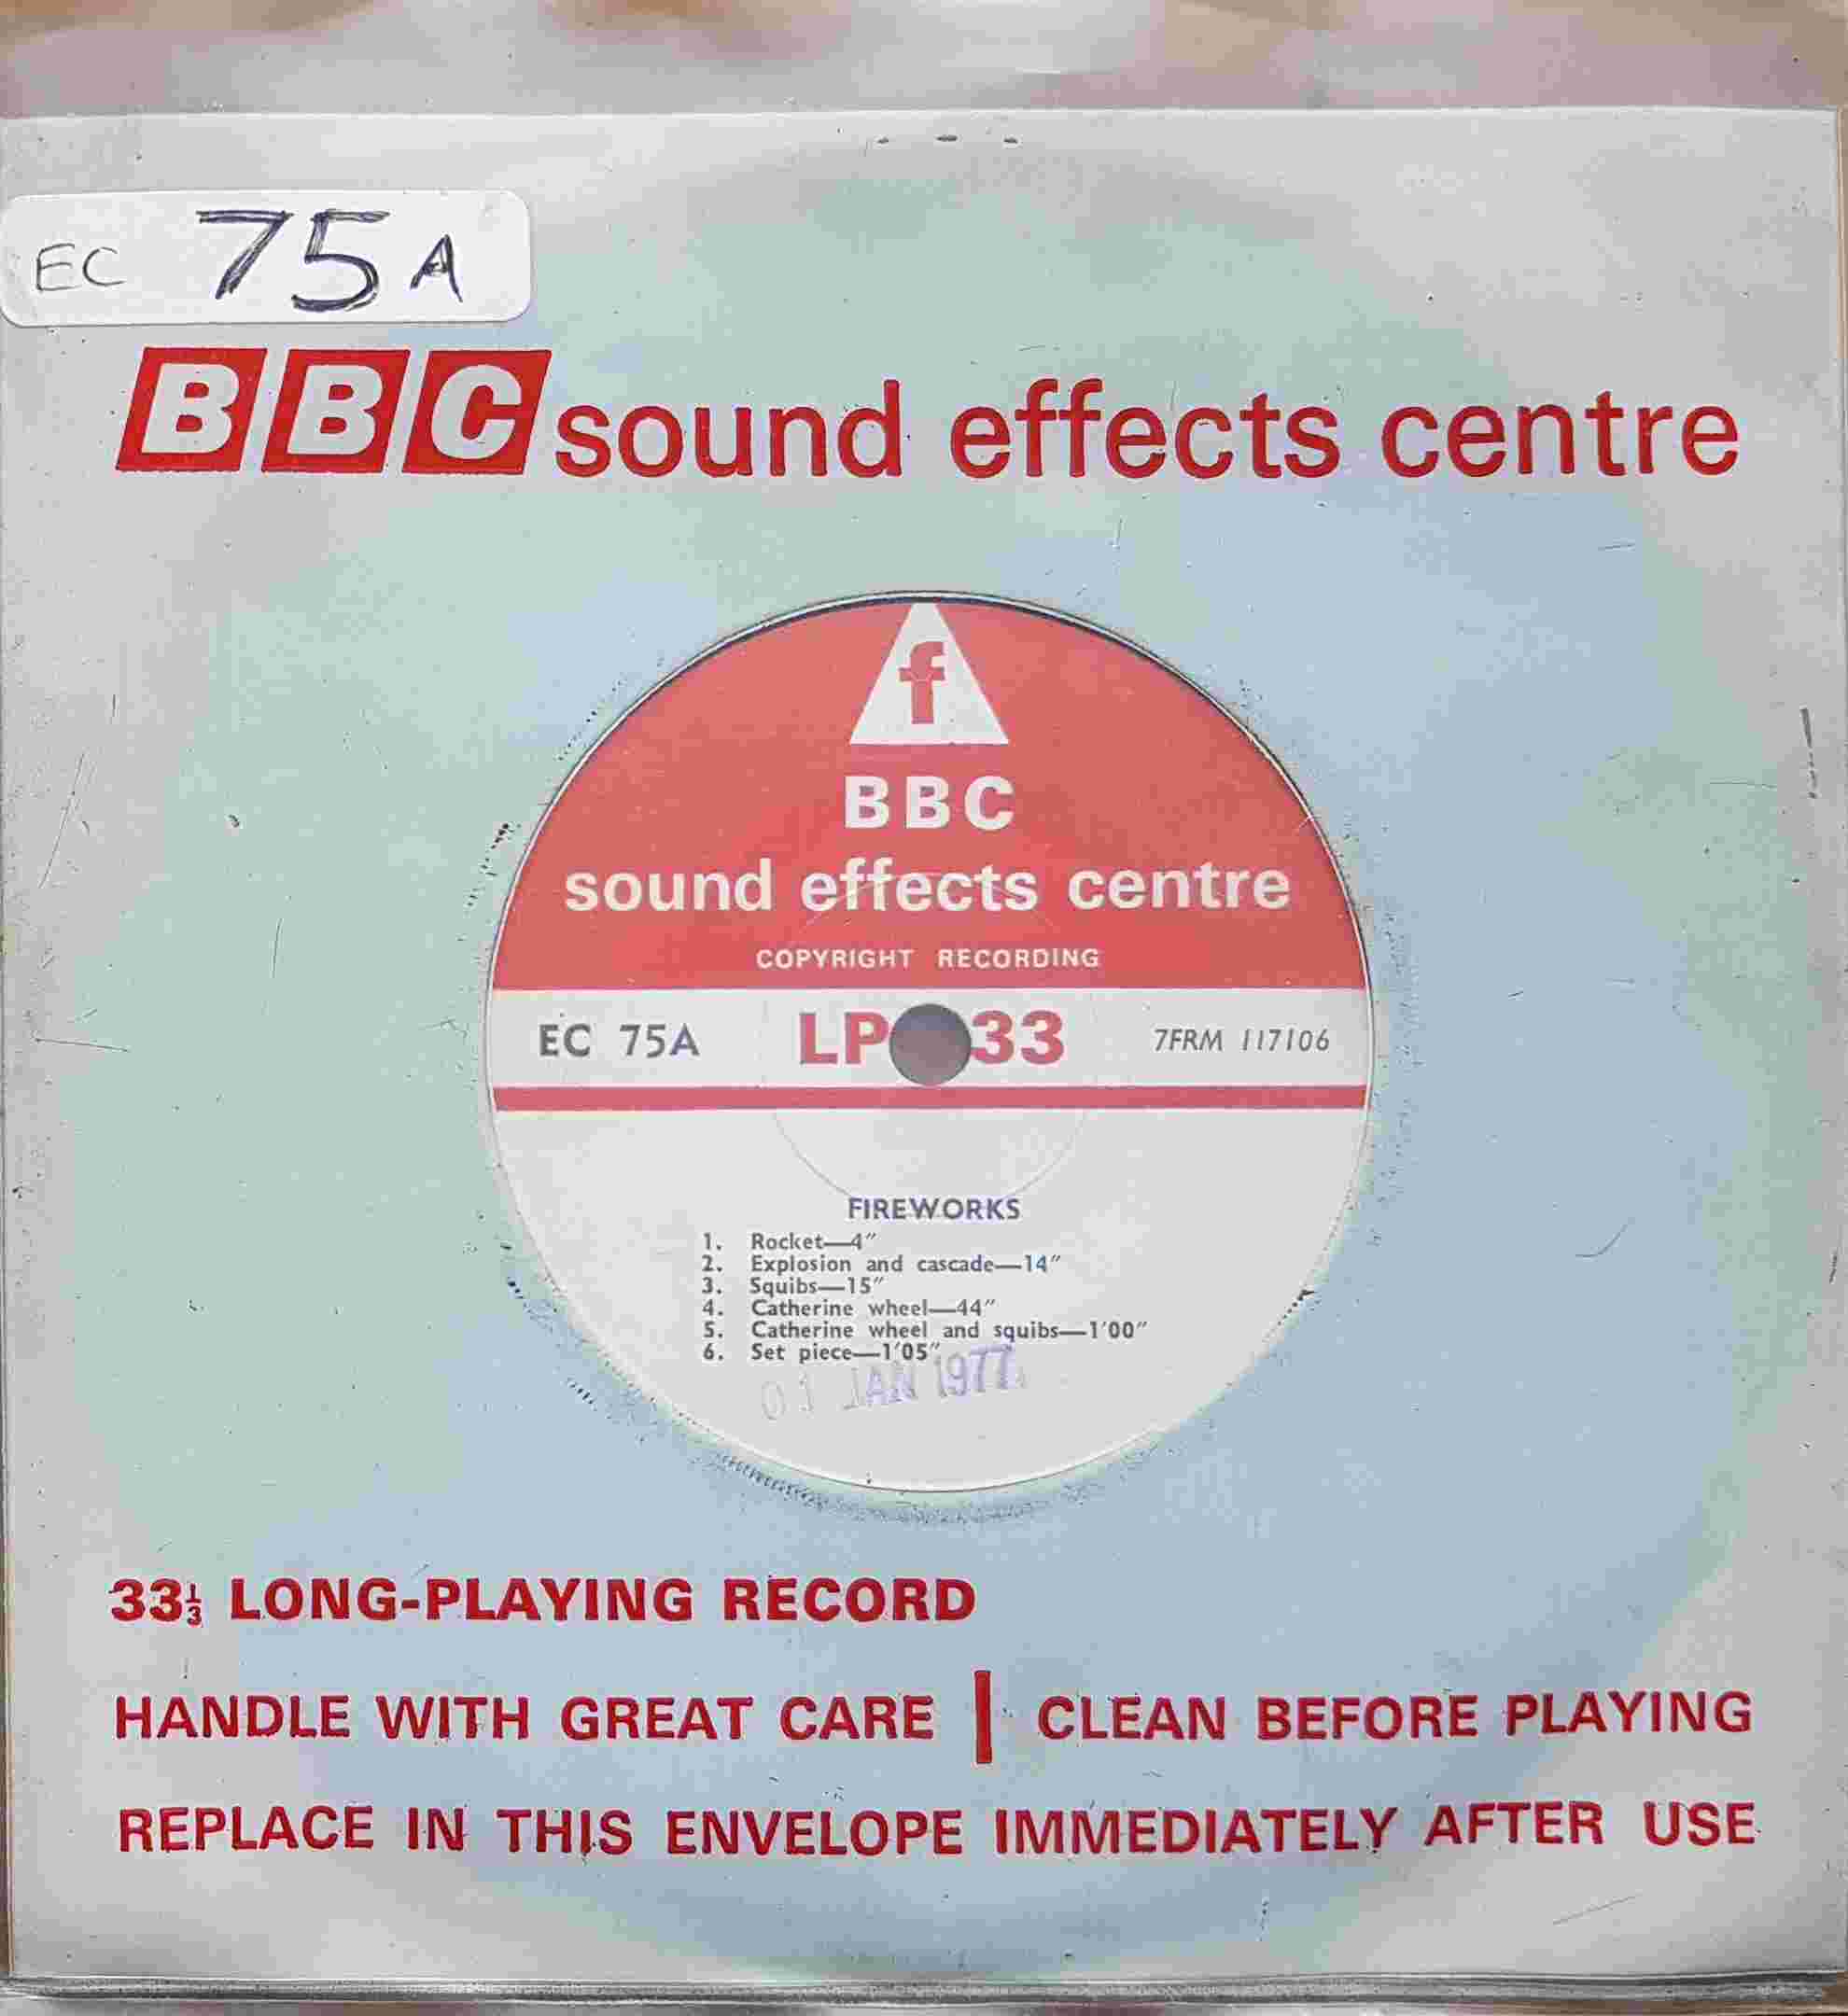 Picture of EC 75A Fireworks by artist Not registered from the BBC singles - Records and Tapes library